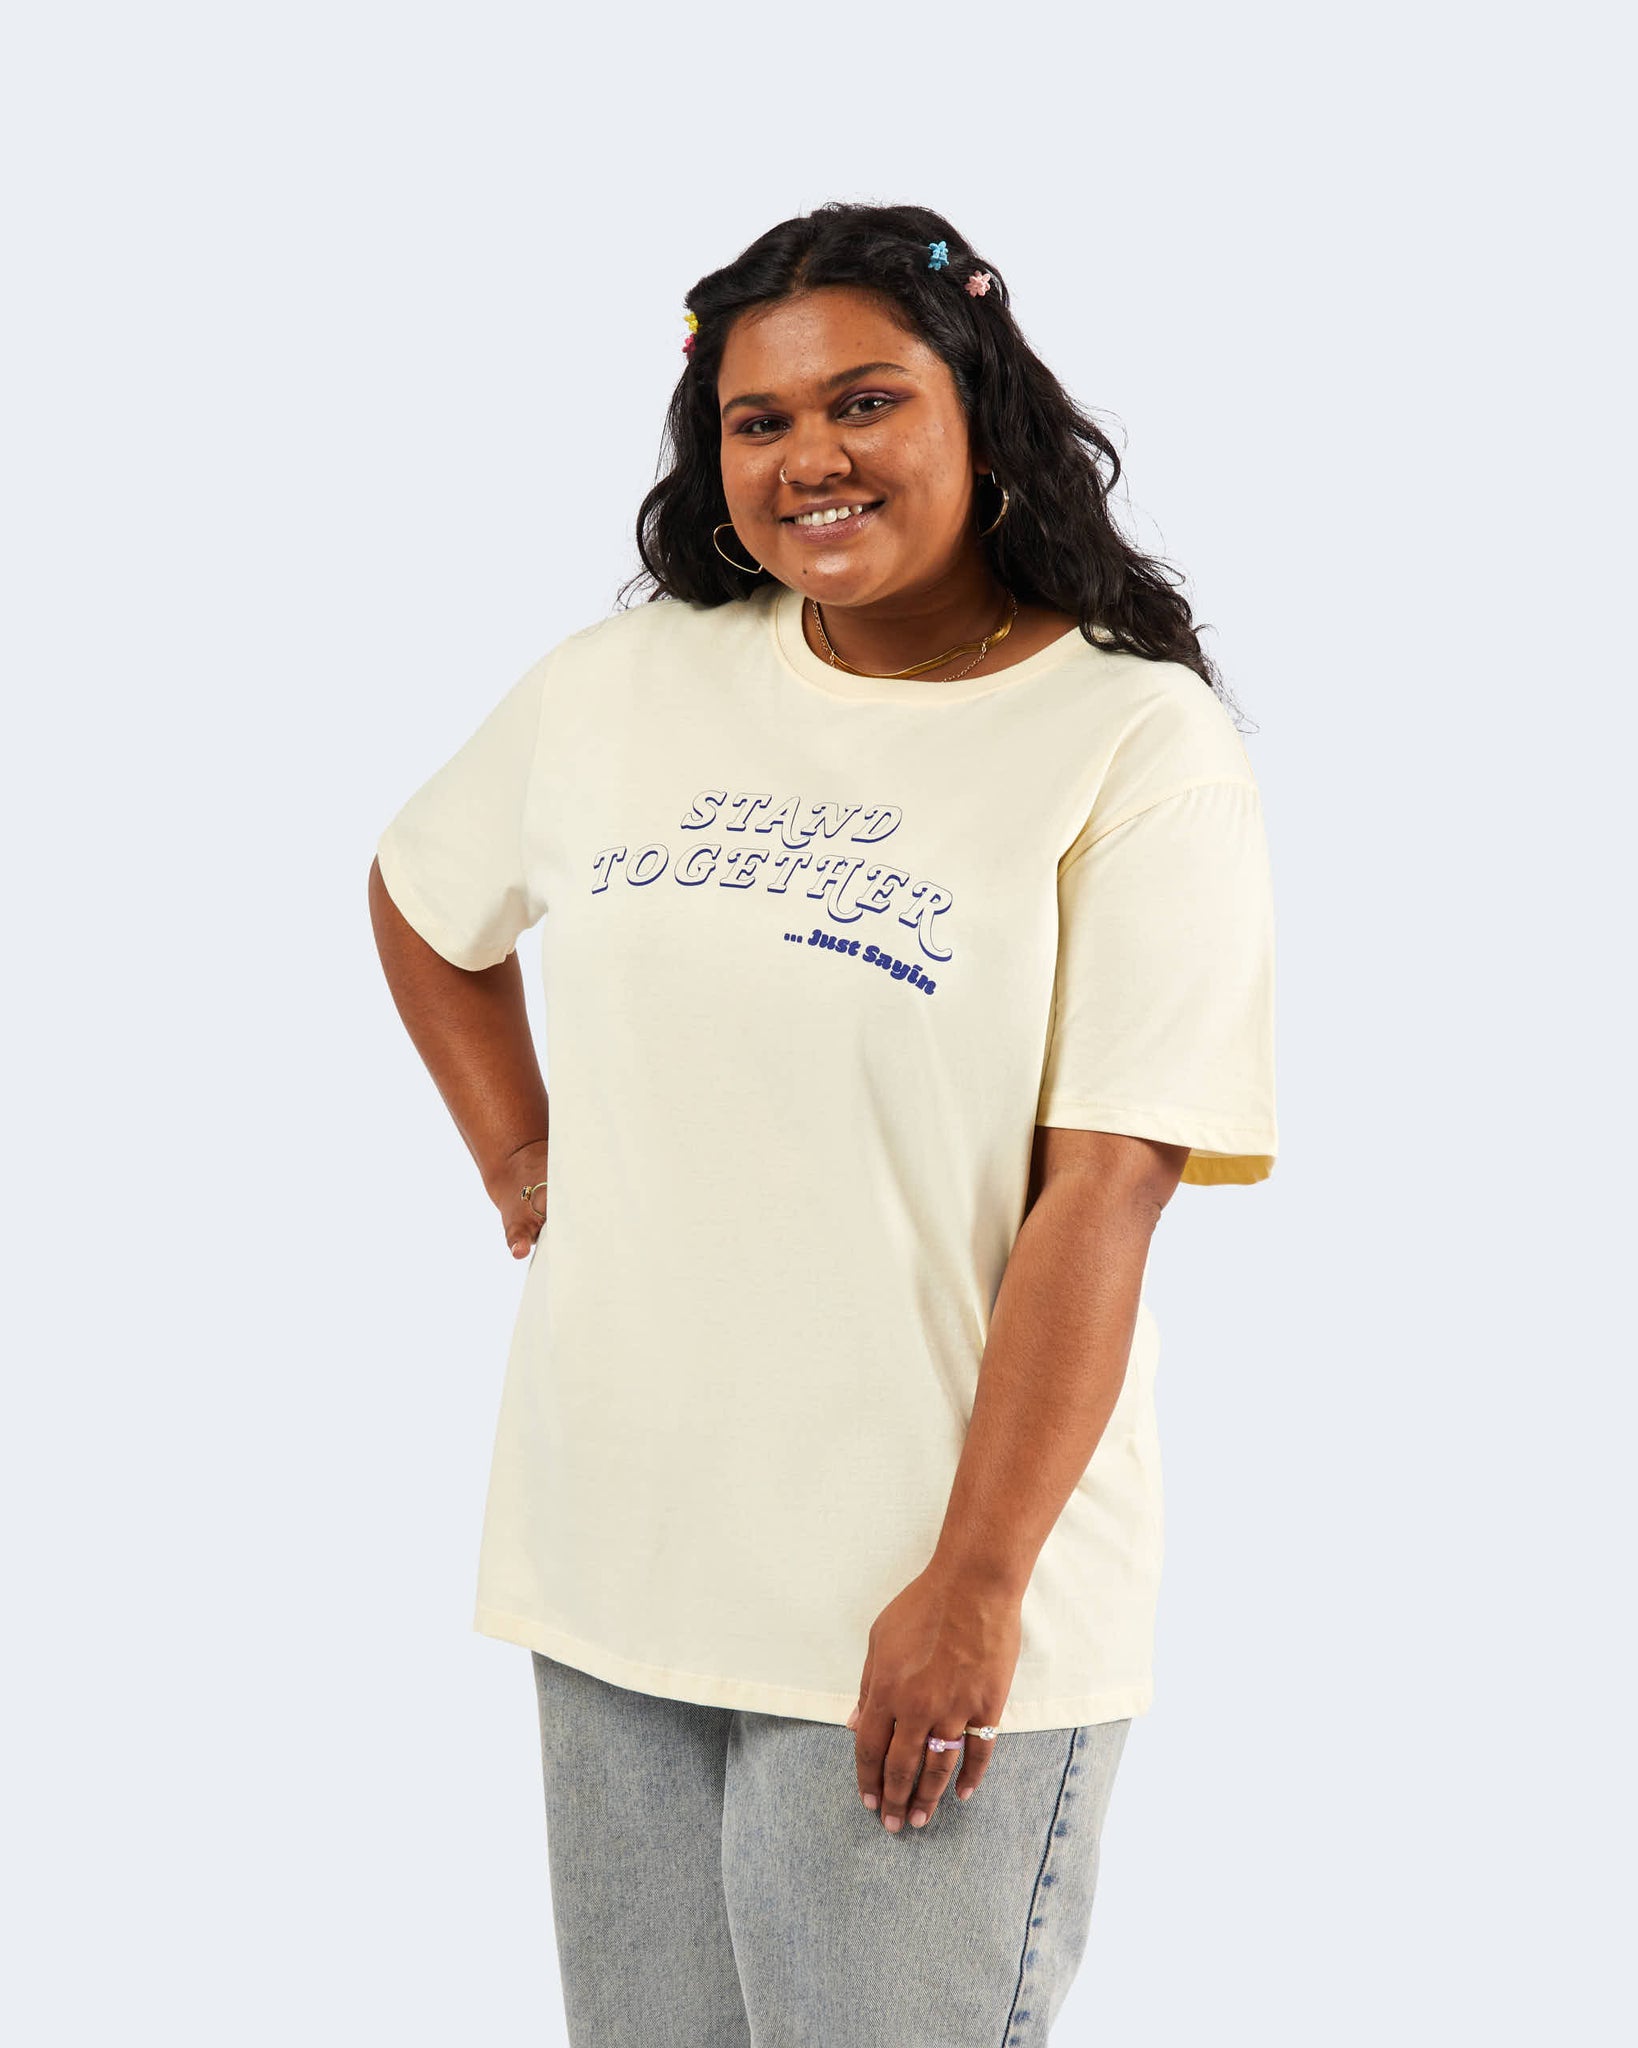 Stand Together Tee - Navy